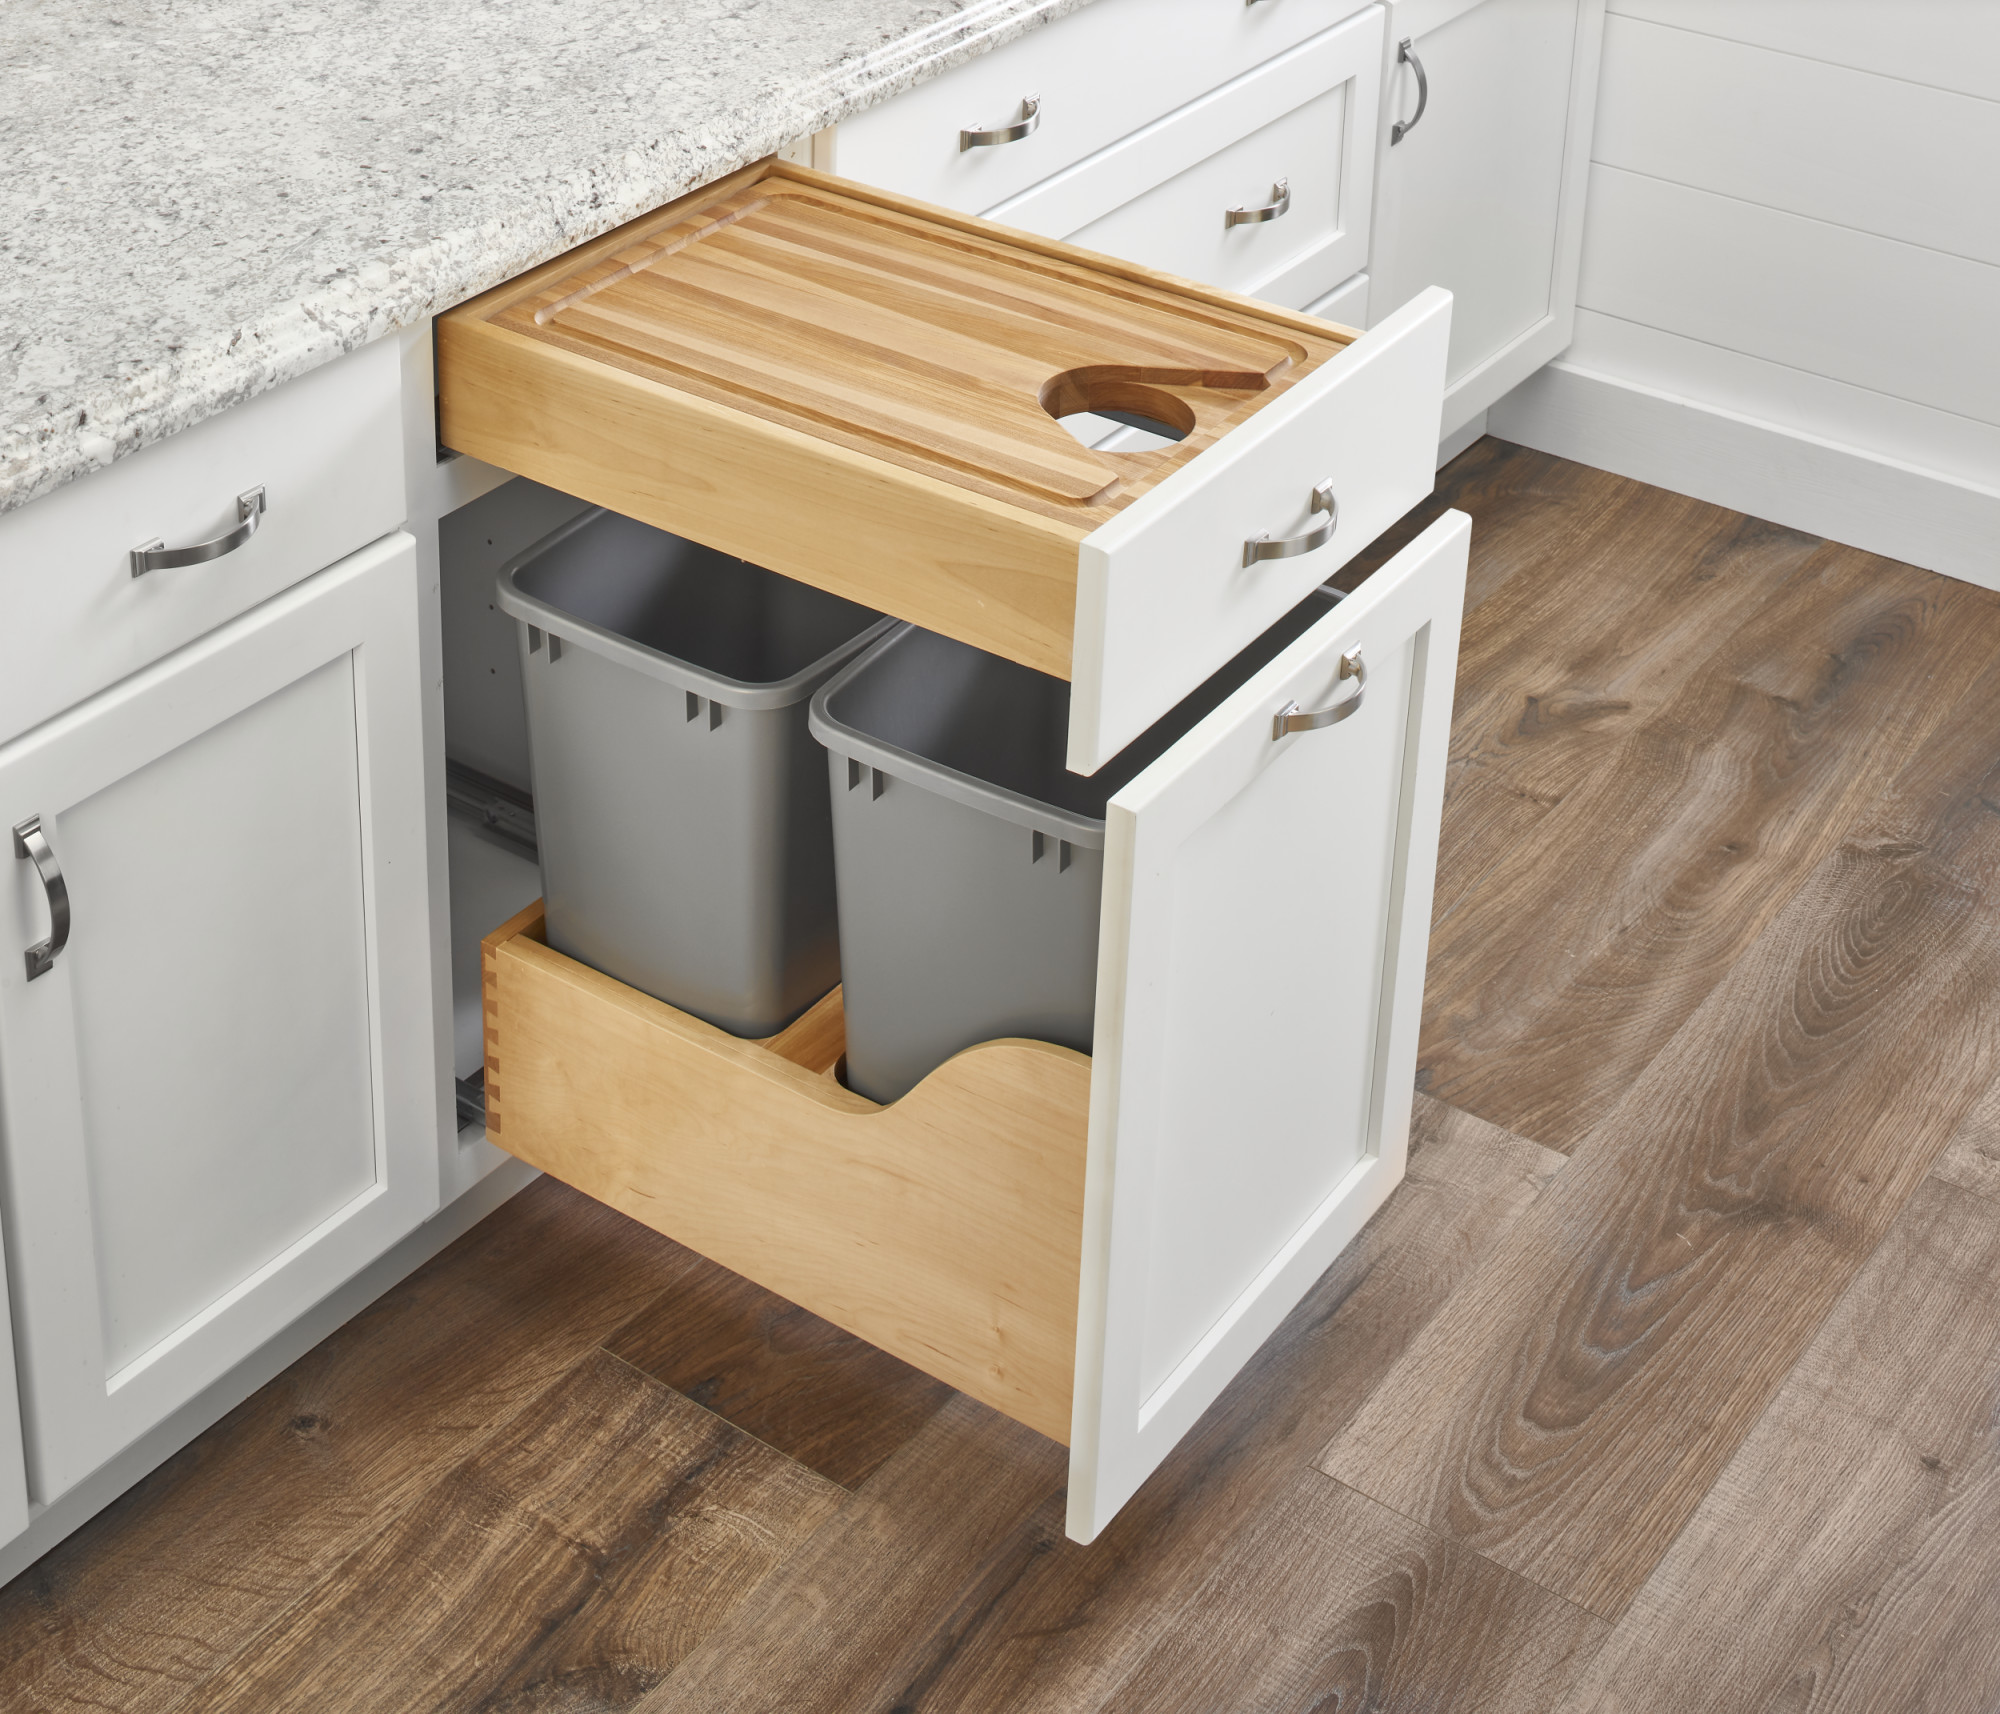 Cutting Board Drawer - Built-in, Removable Cutting Board - CliqStudios